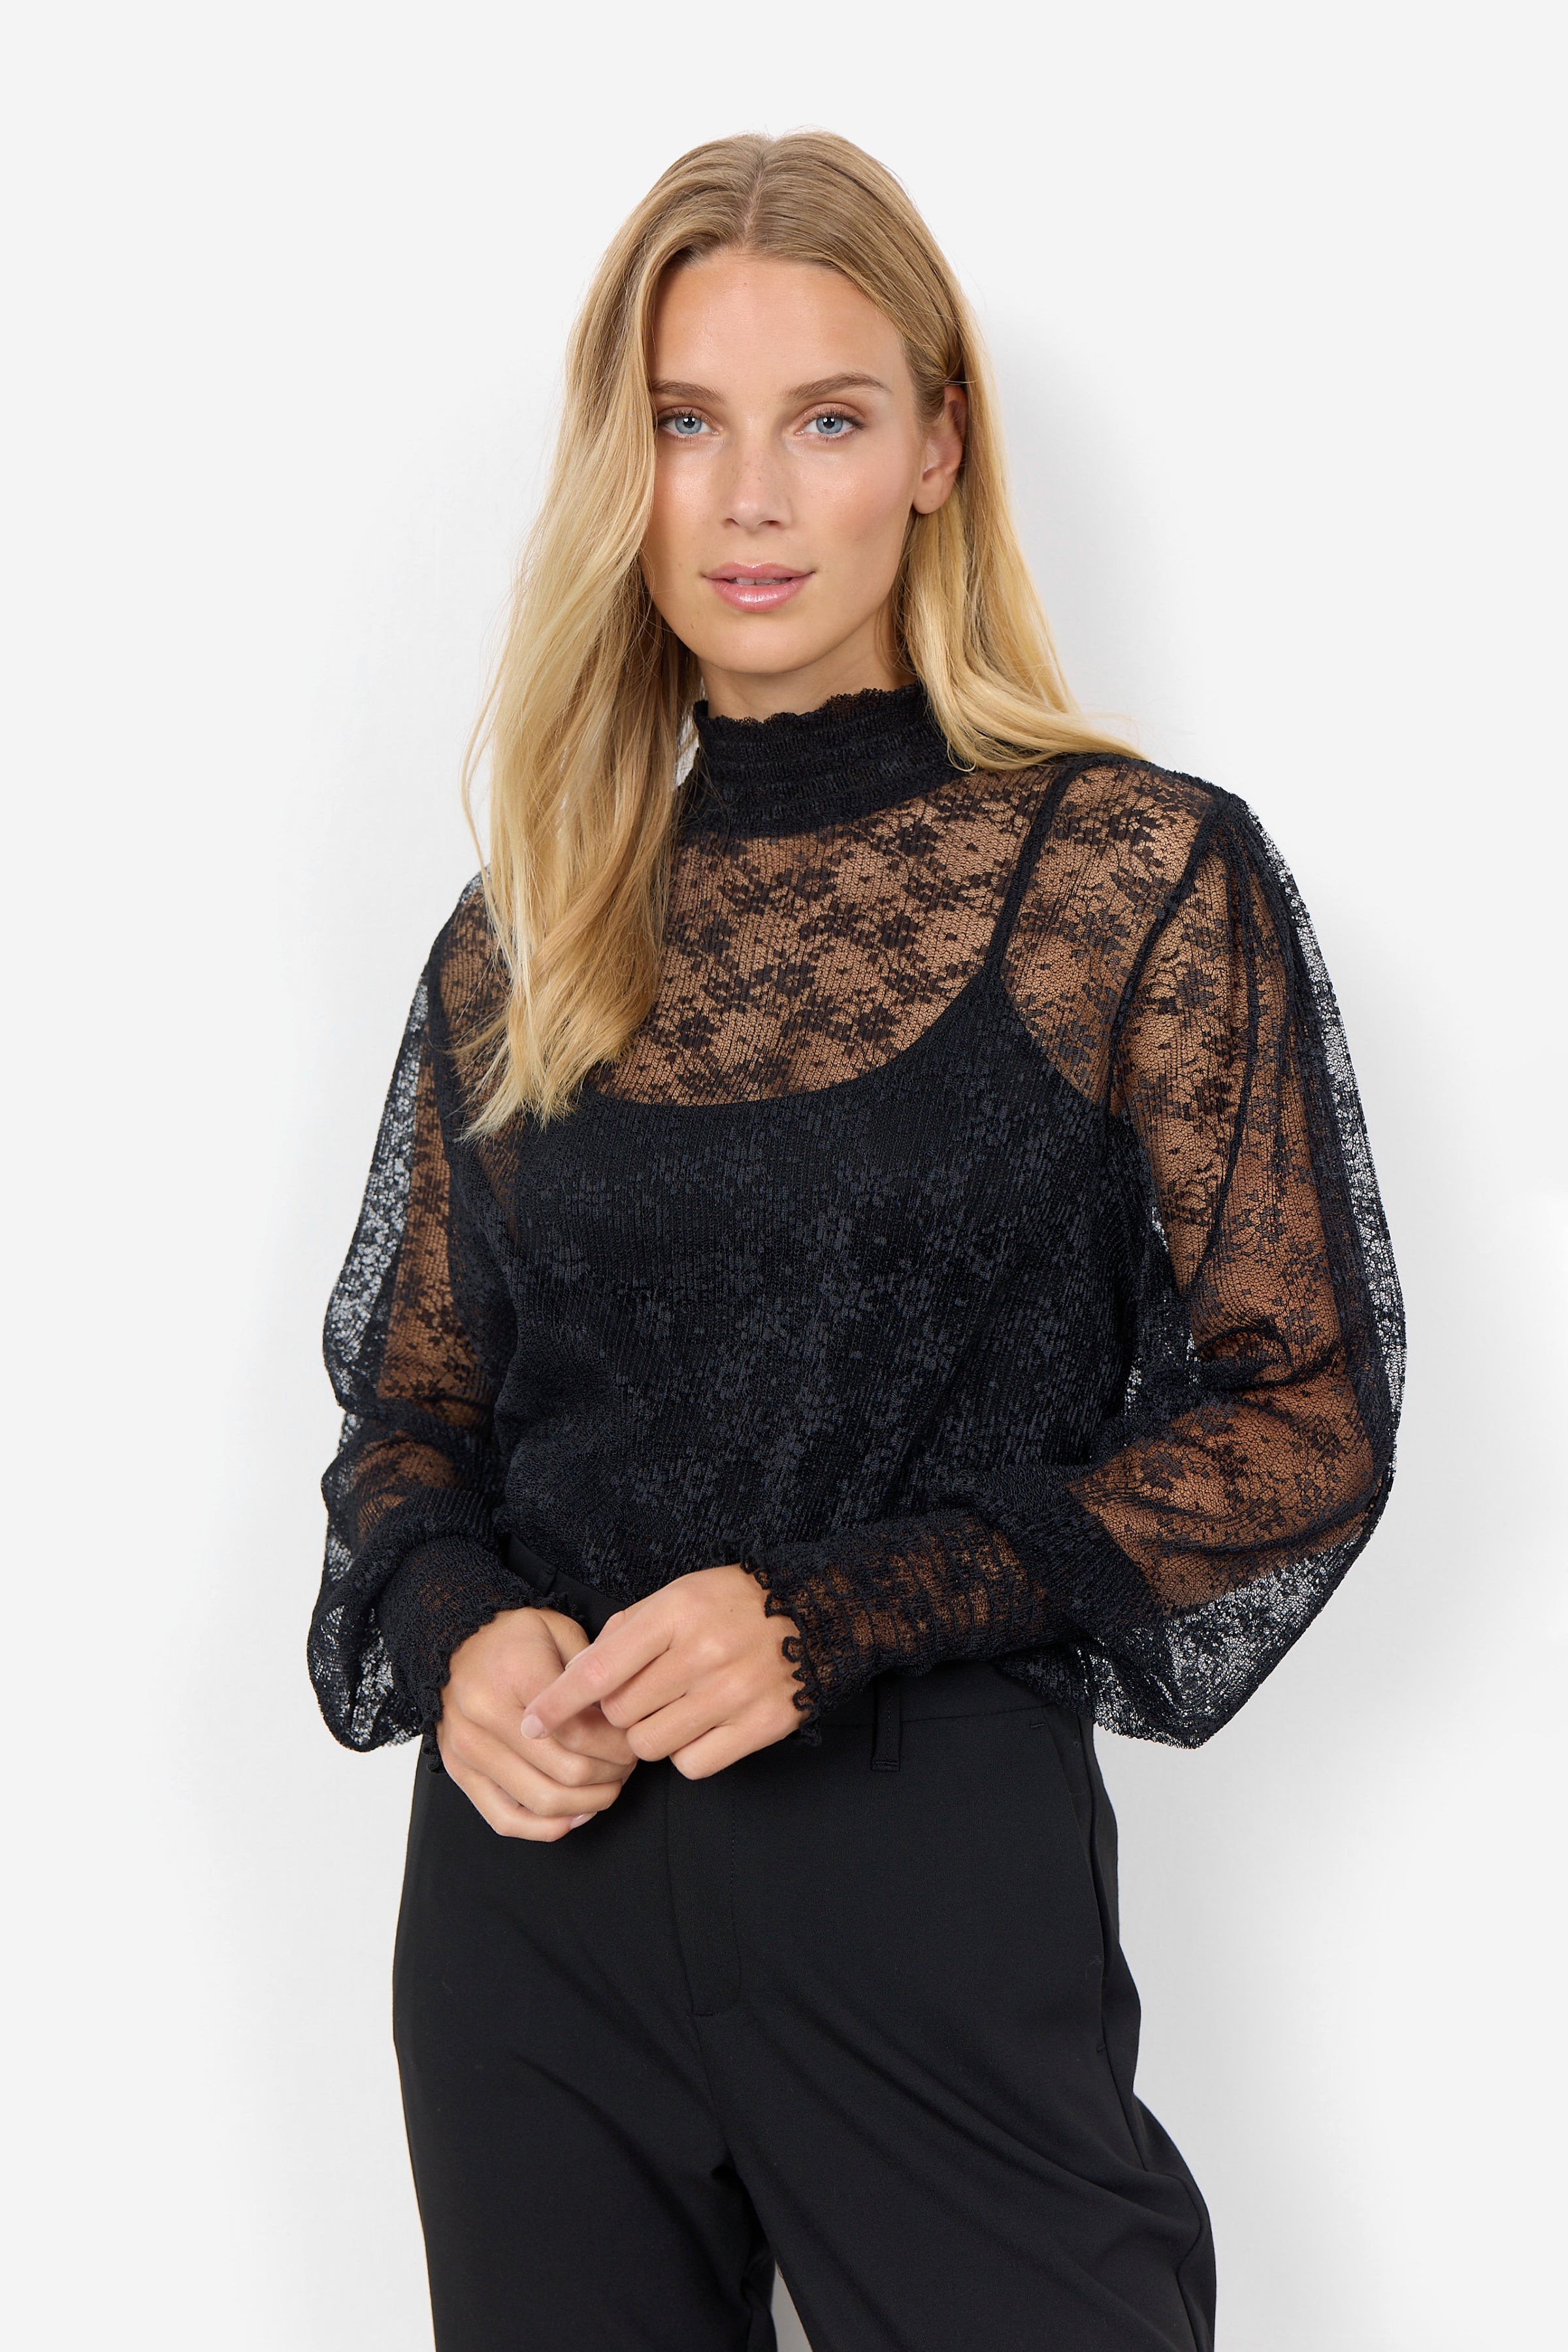 The Vallie Lace Top – Incandescent